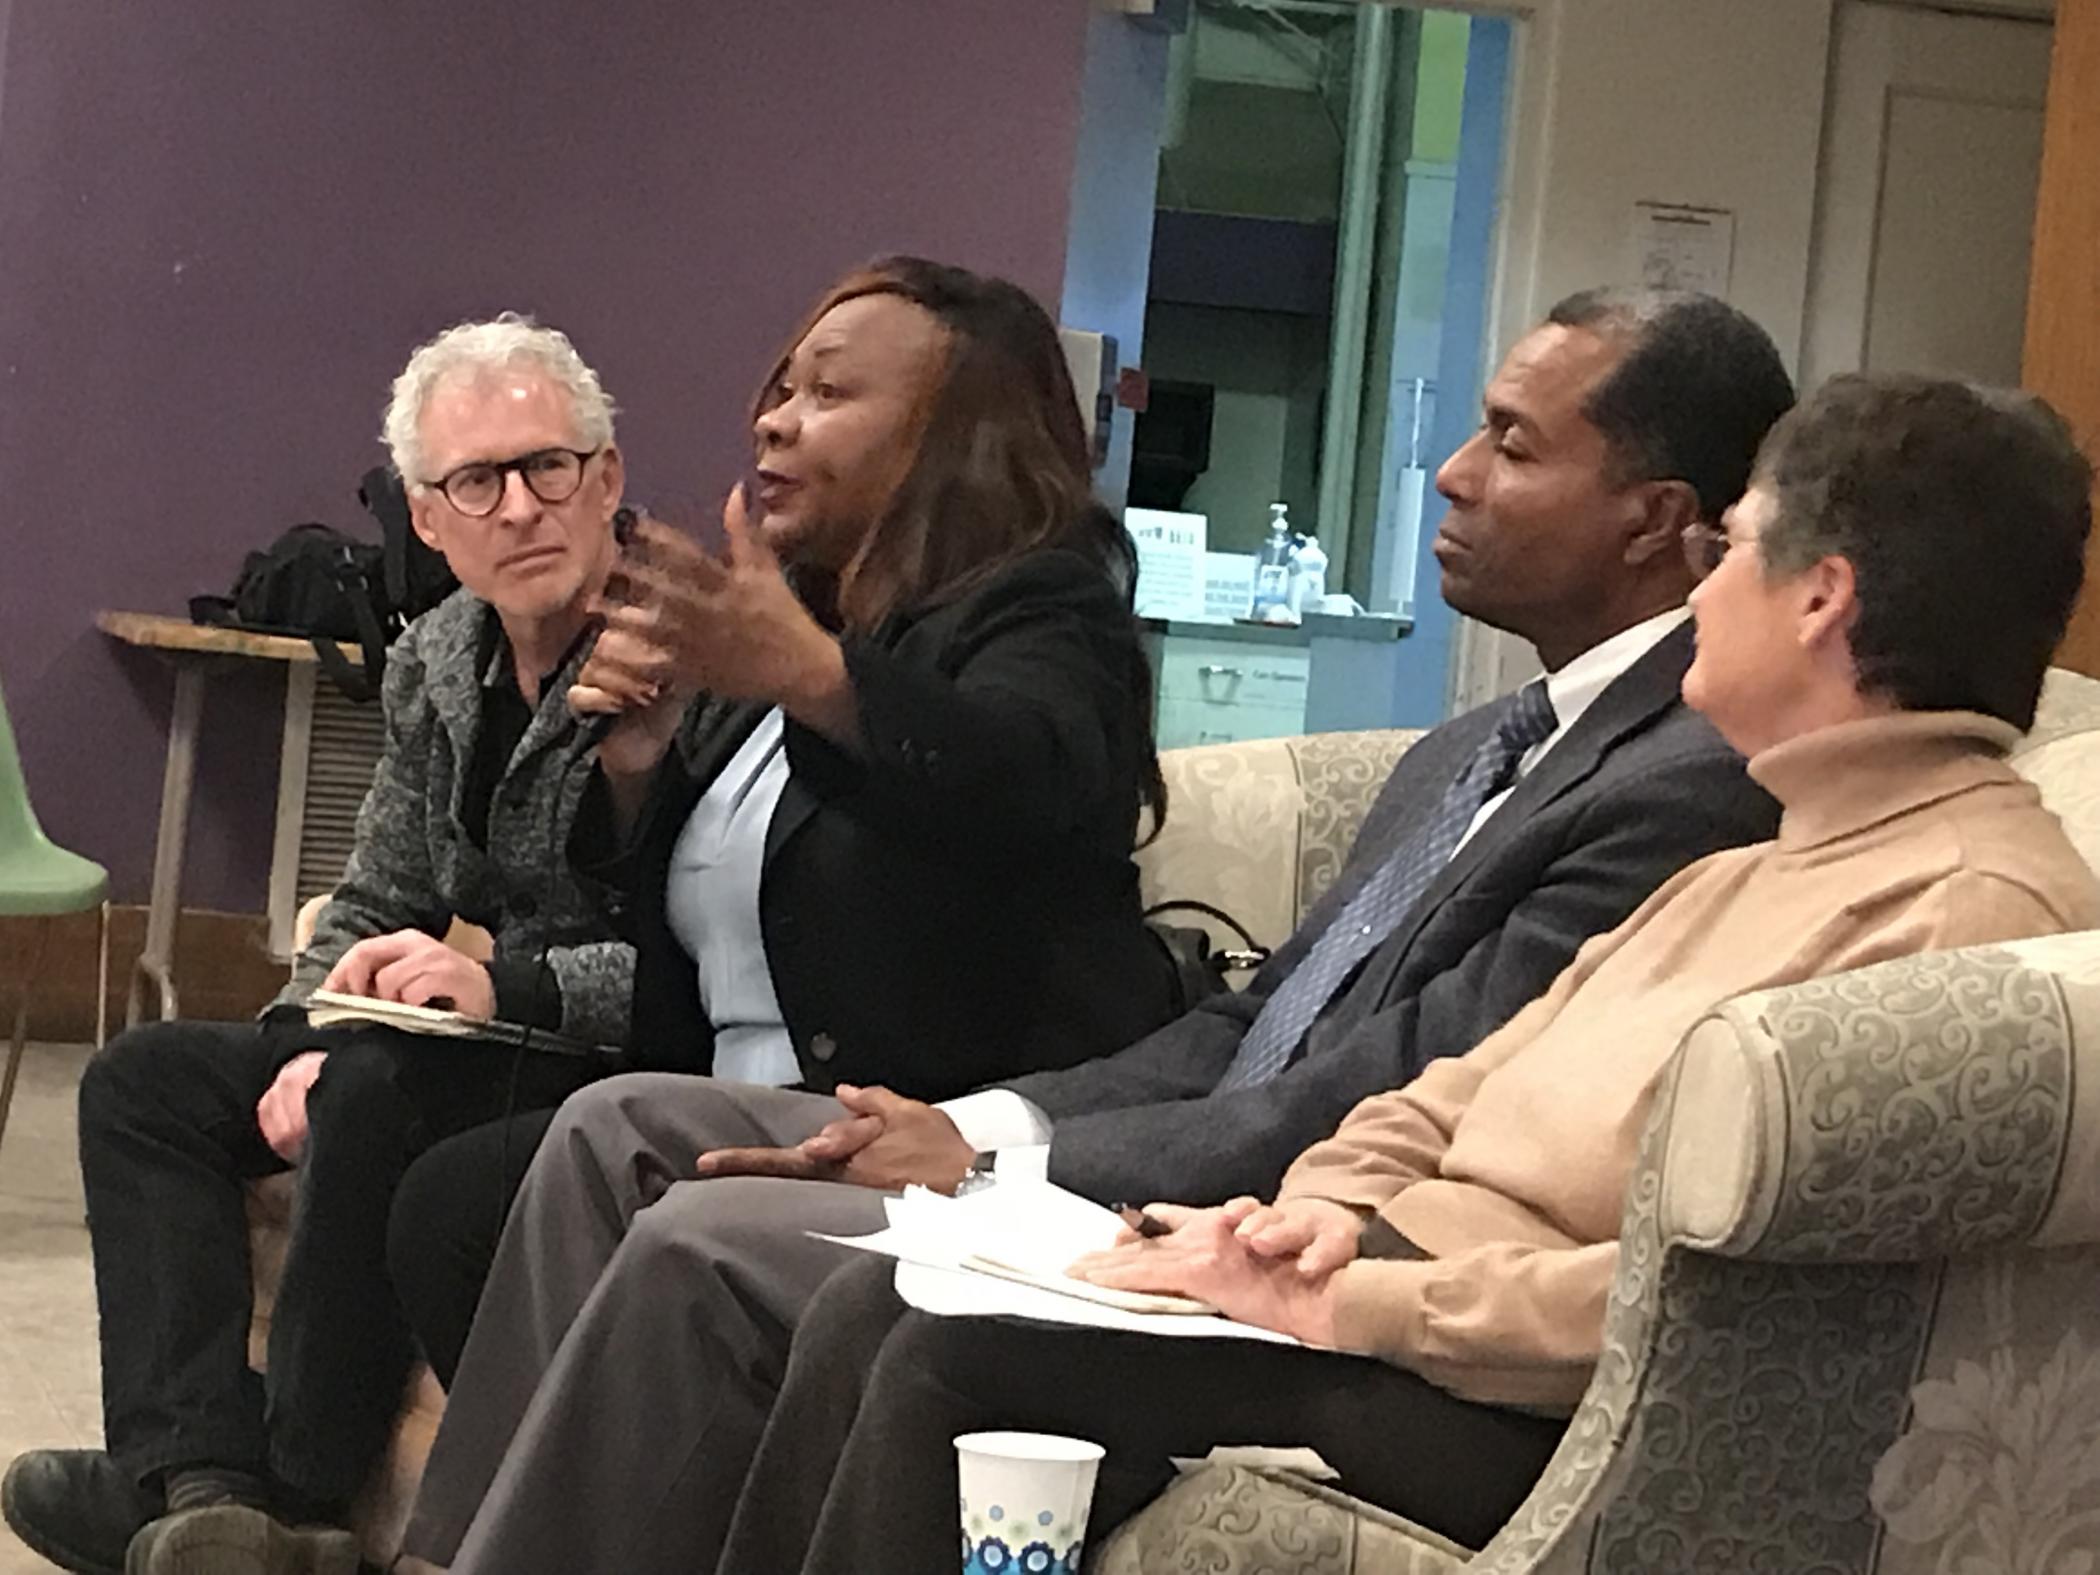 A woman speaking passionately as other panelists listen.